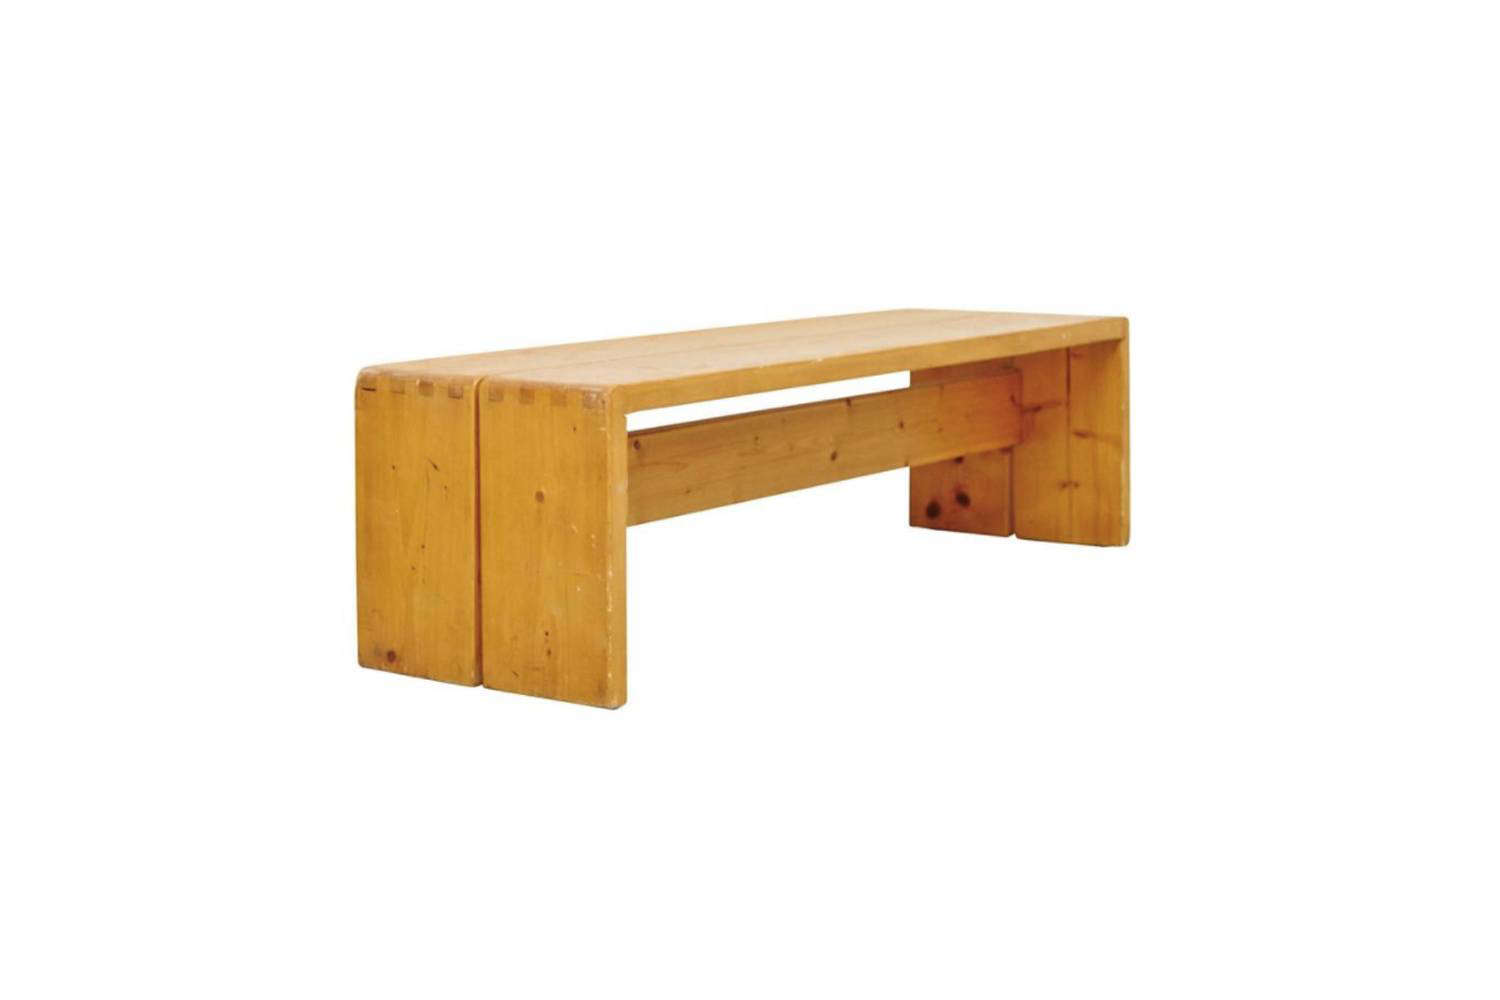 Charlotte Perriand Benches